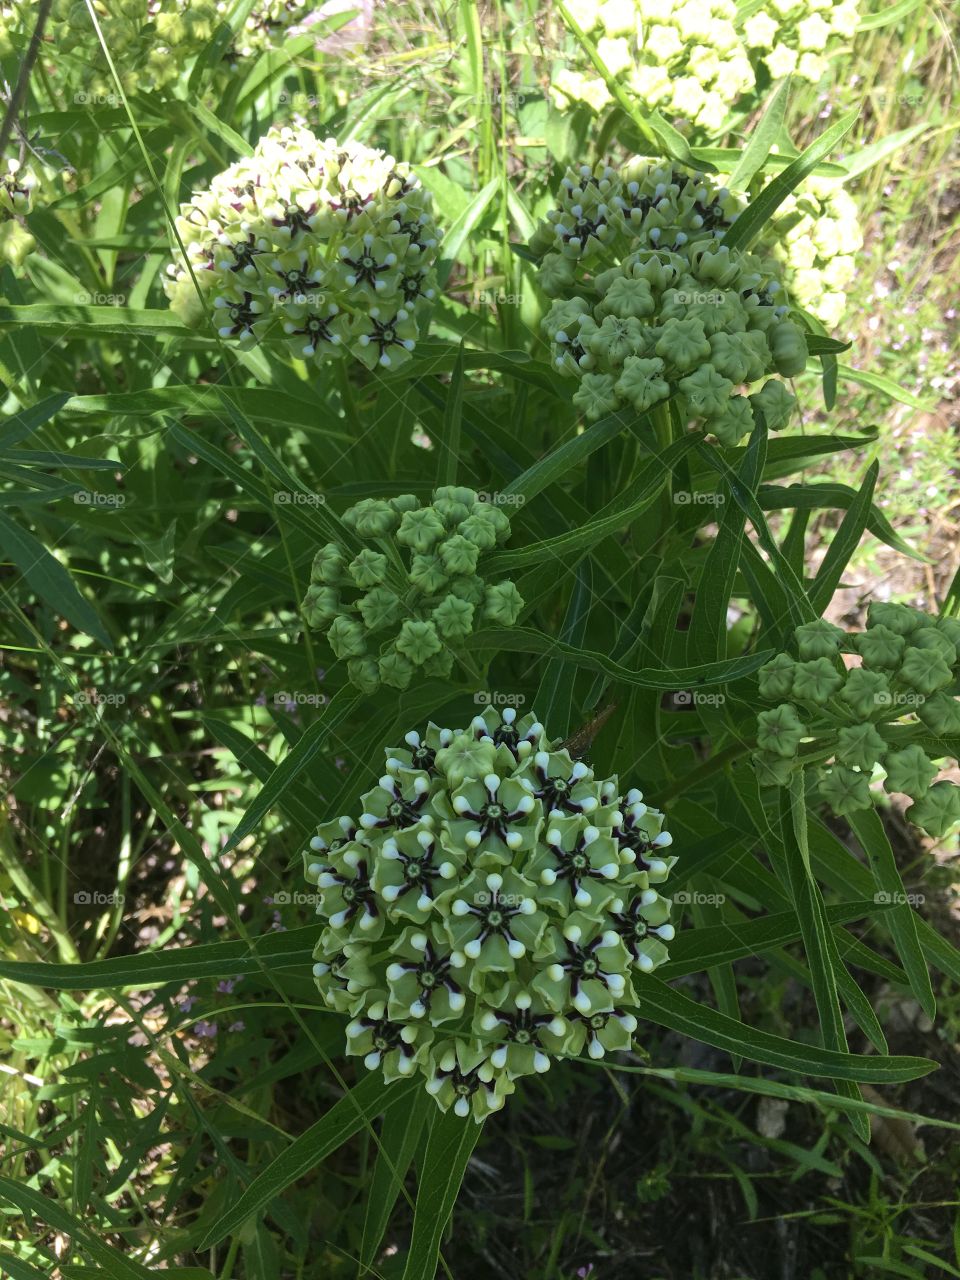 Found some milkweed at the park! So pretty